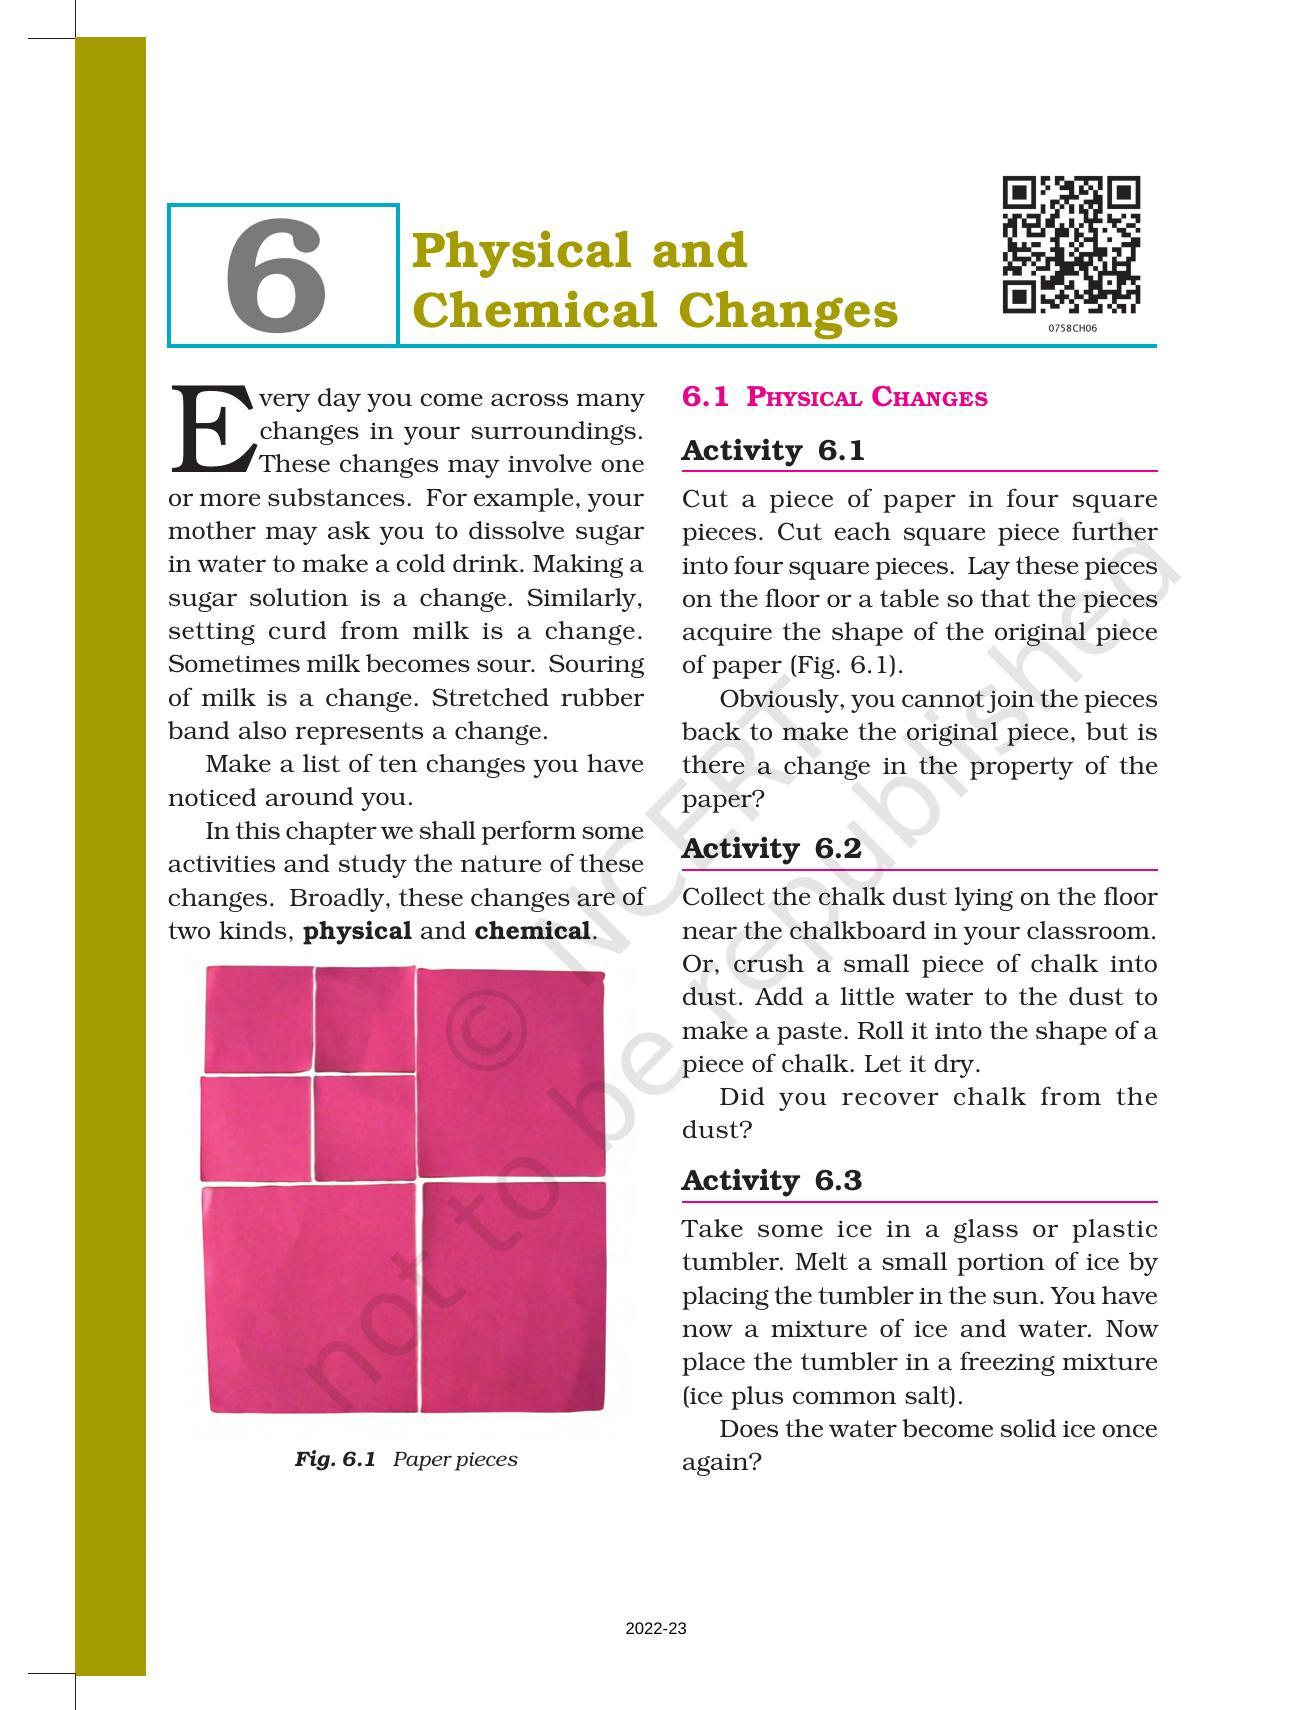 NCERT Book for Class 7 Science: Chapter 6-Physical and Chemical Changes - Page 1